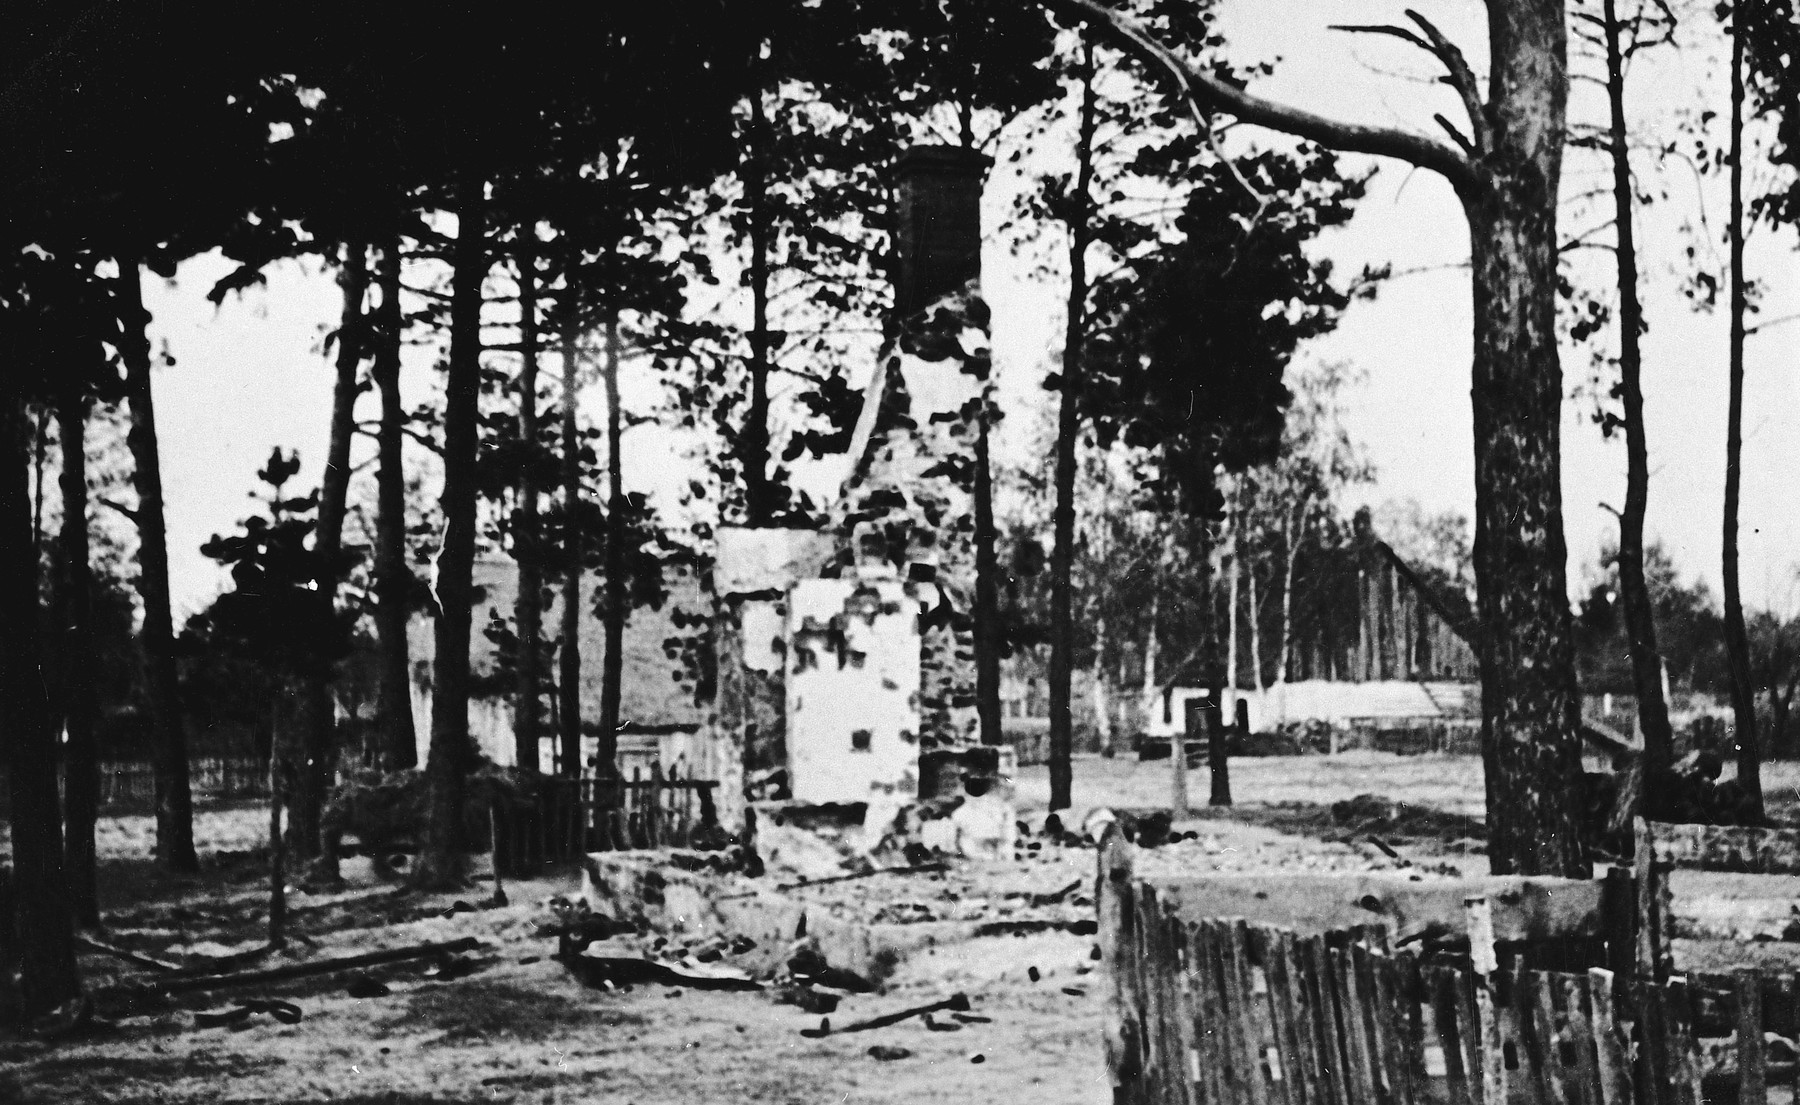 The ruins of Michniow after its "pacification" by the 1st Motorized Police Battalion.